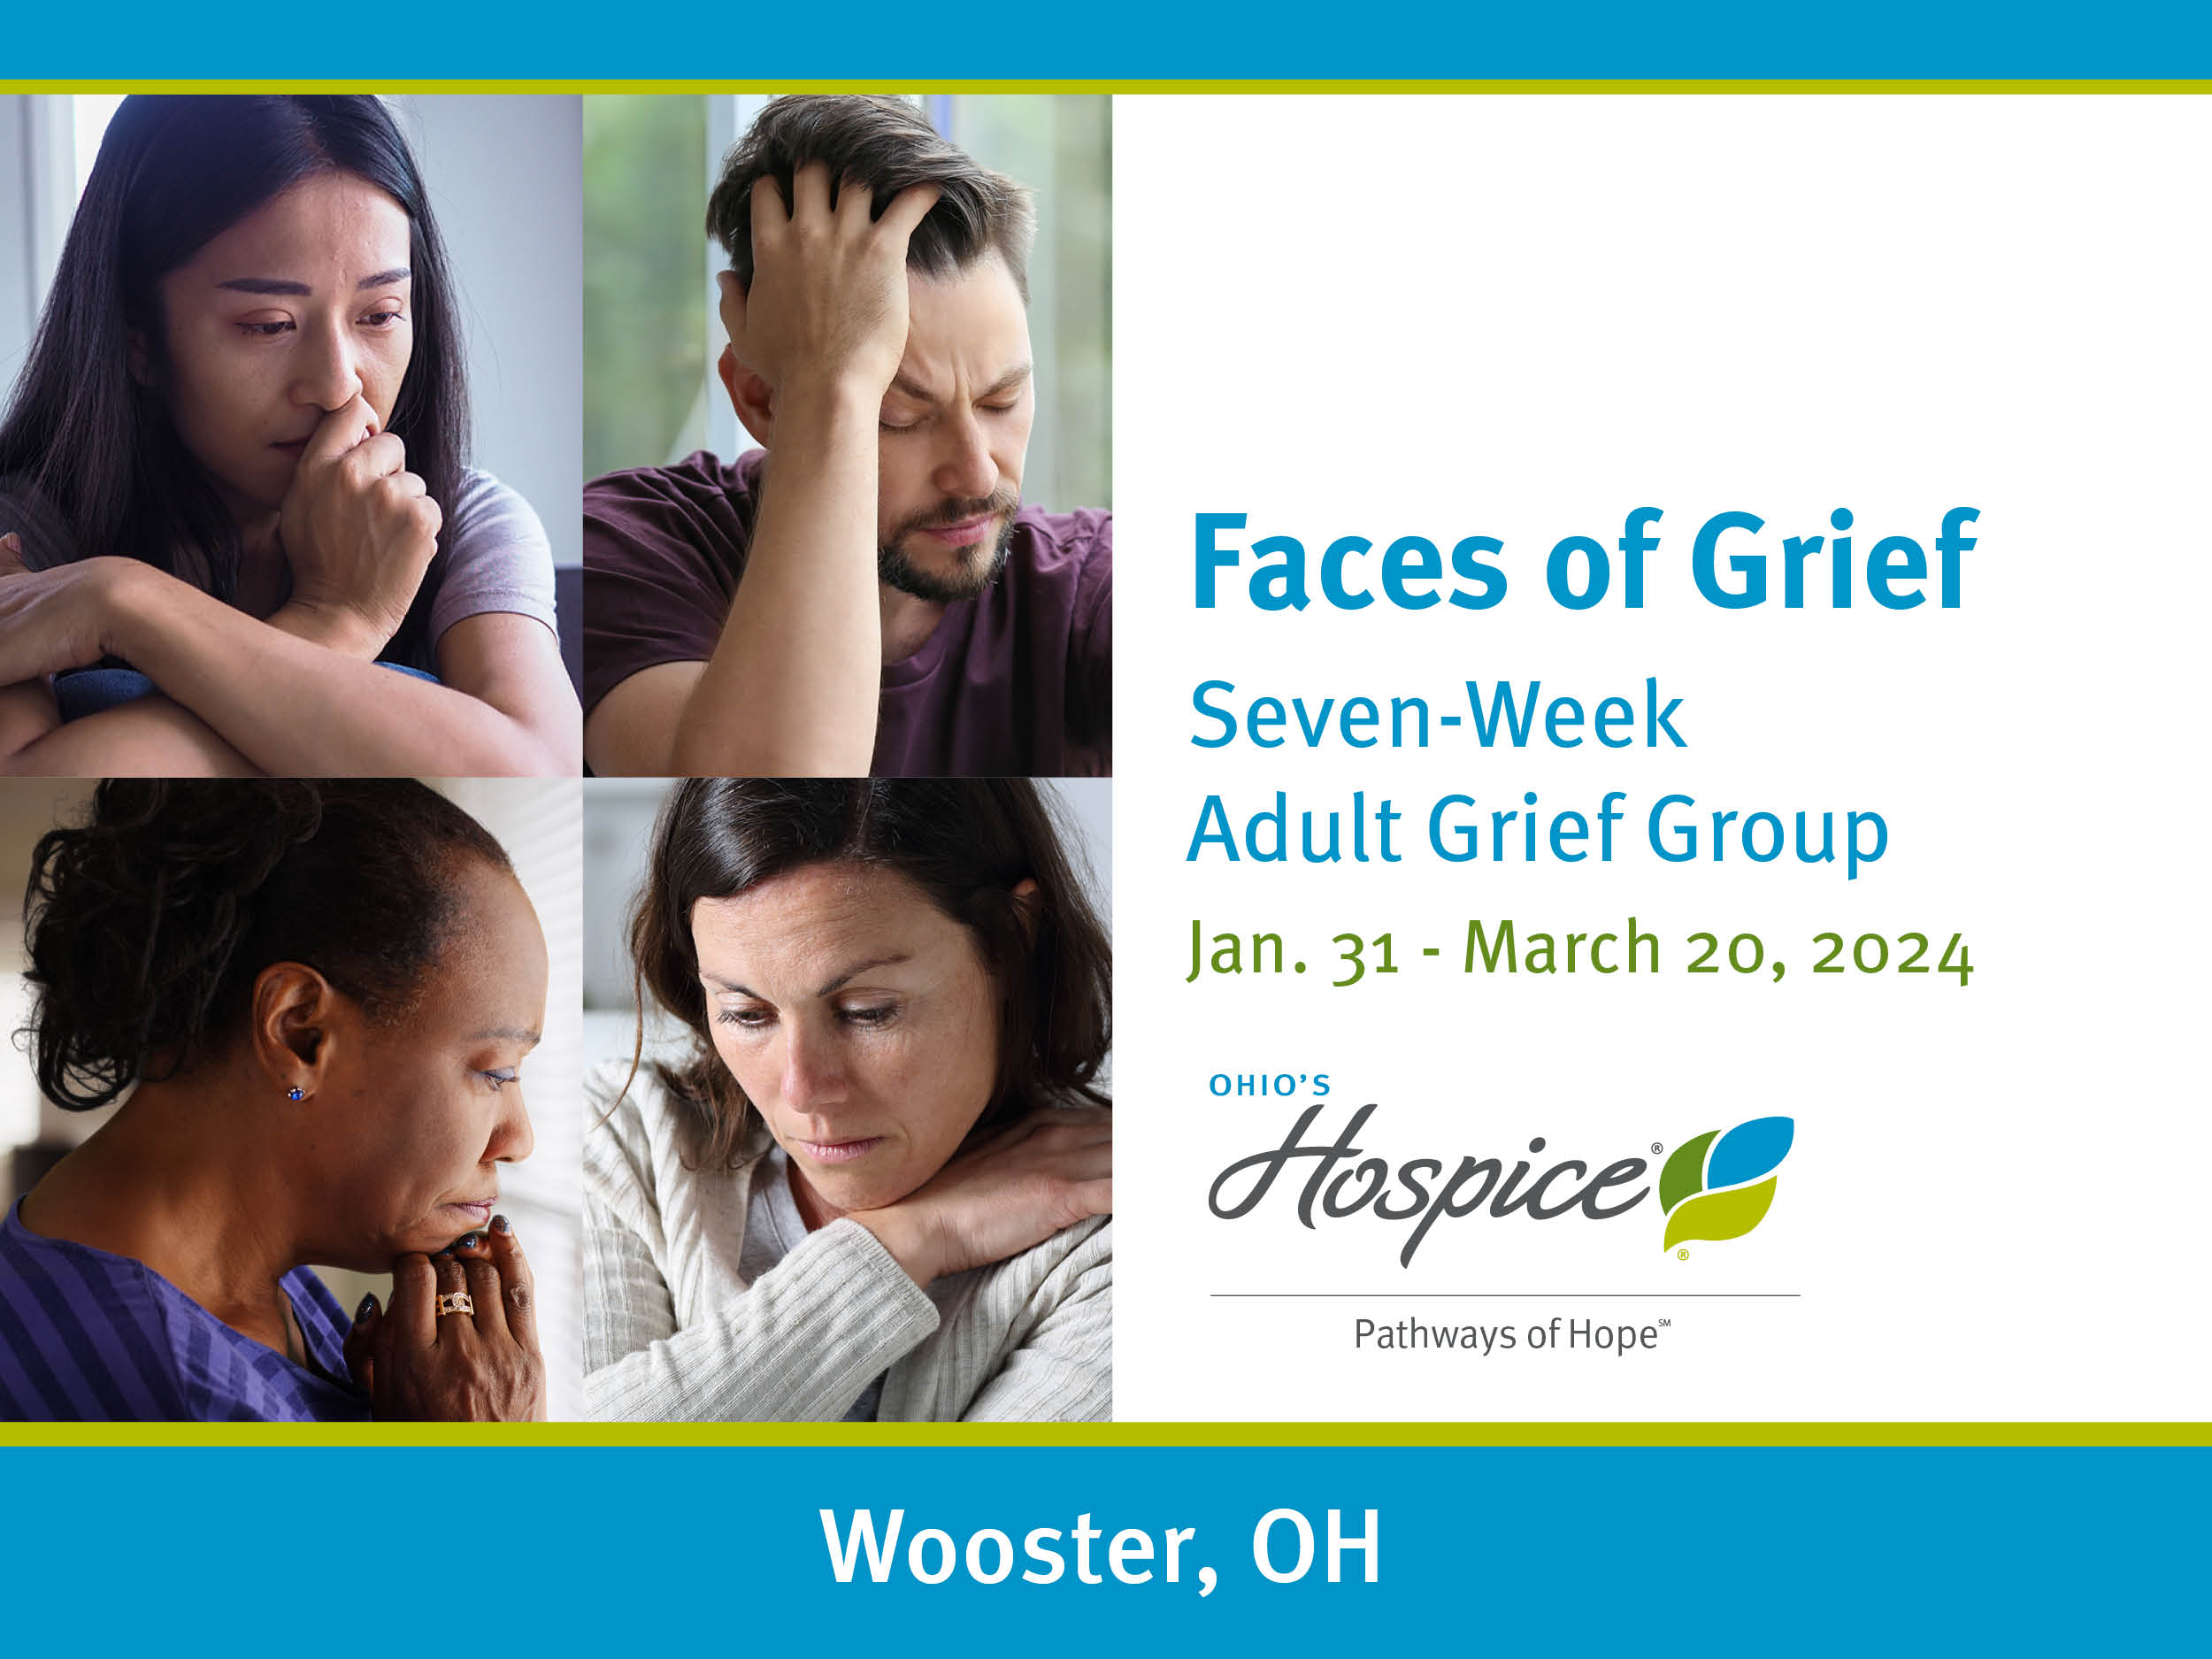 Faces of Grief Seven-Week Adult Grief Group